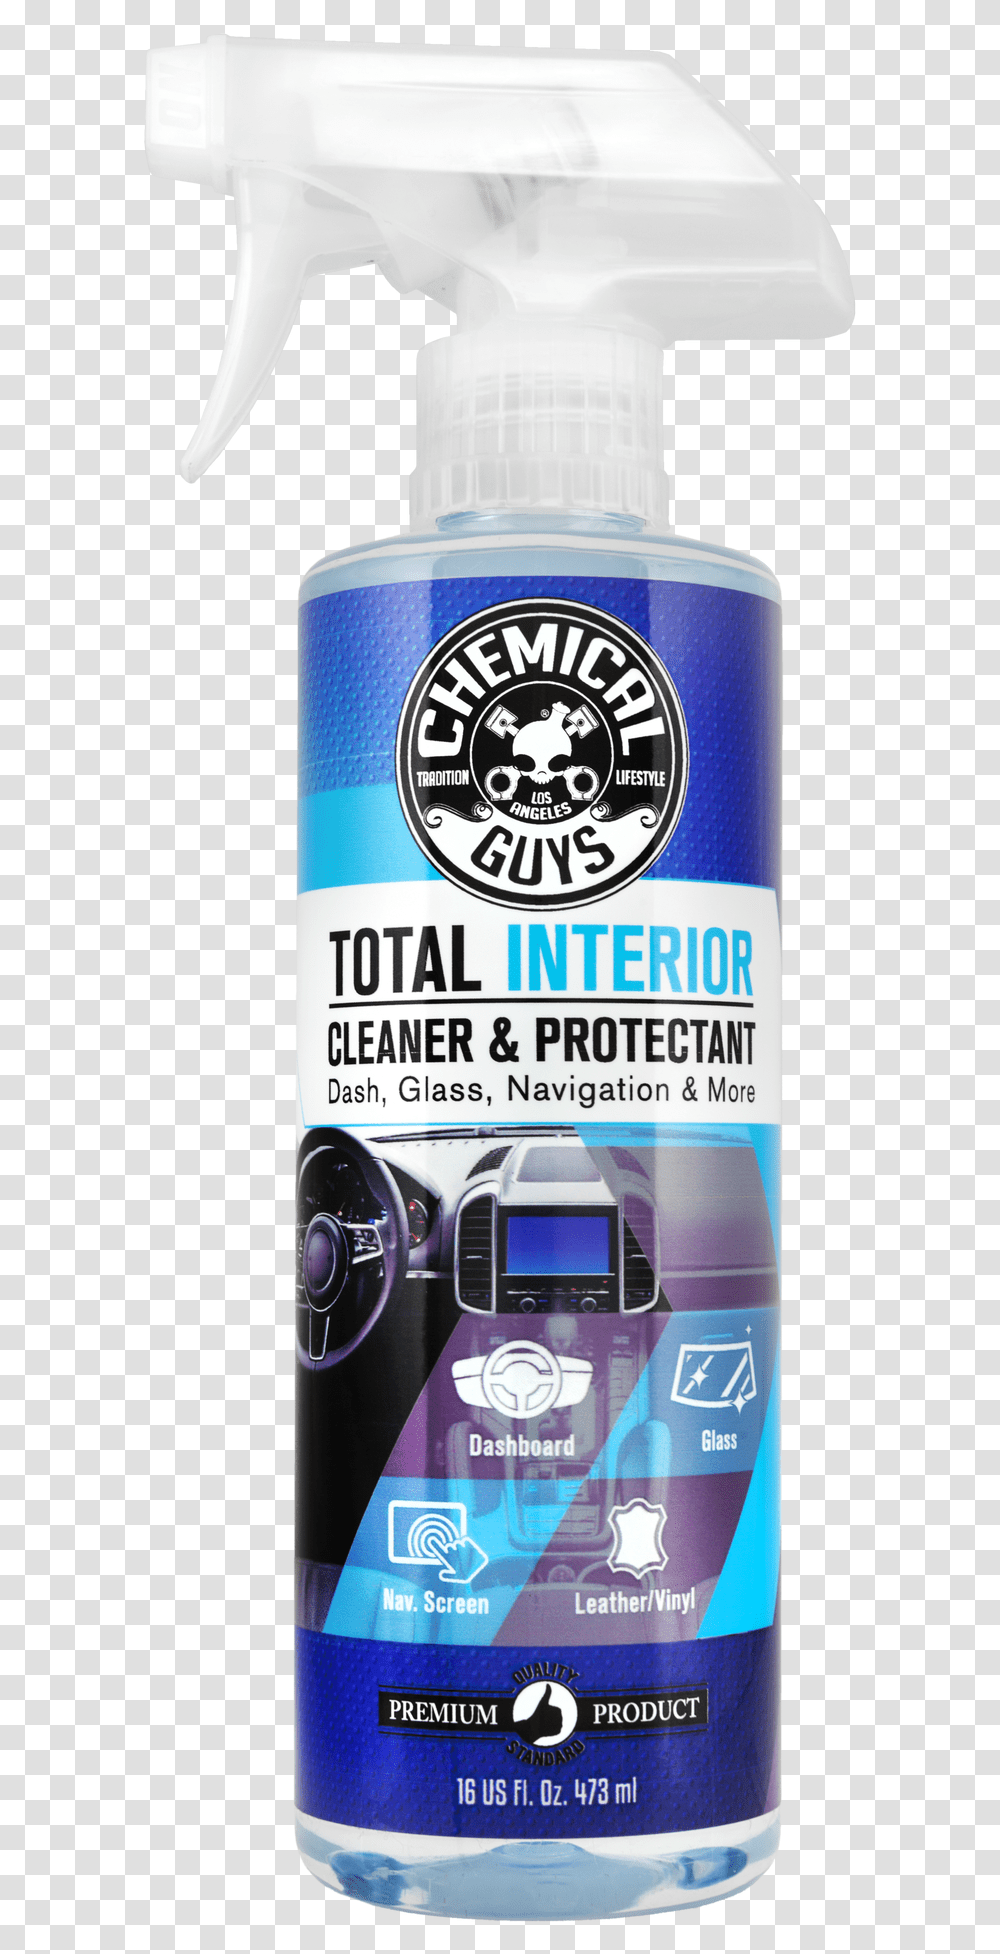 Total Interior Cleaner Ampamp Chemical Guys Total Interior Cleaner Amp Protectant, Tin, Can, Spray Can, Aluminium Transparent Png